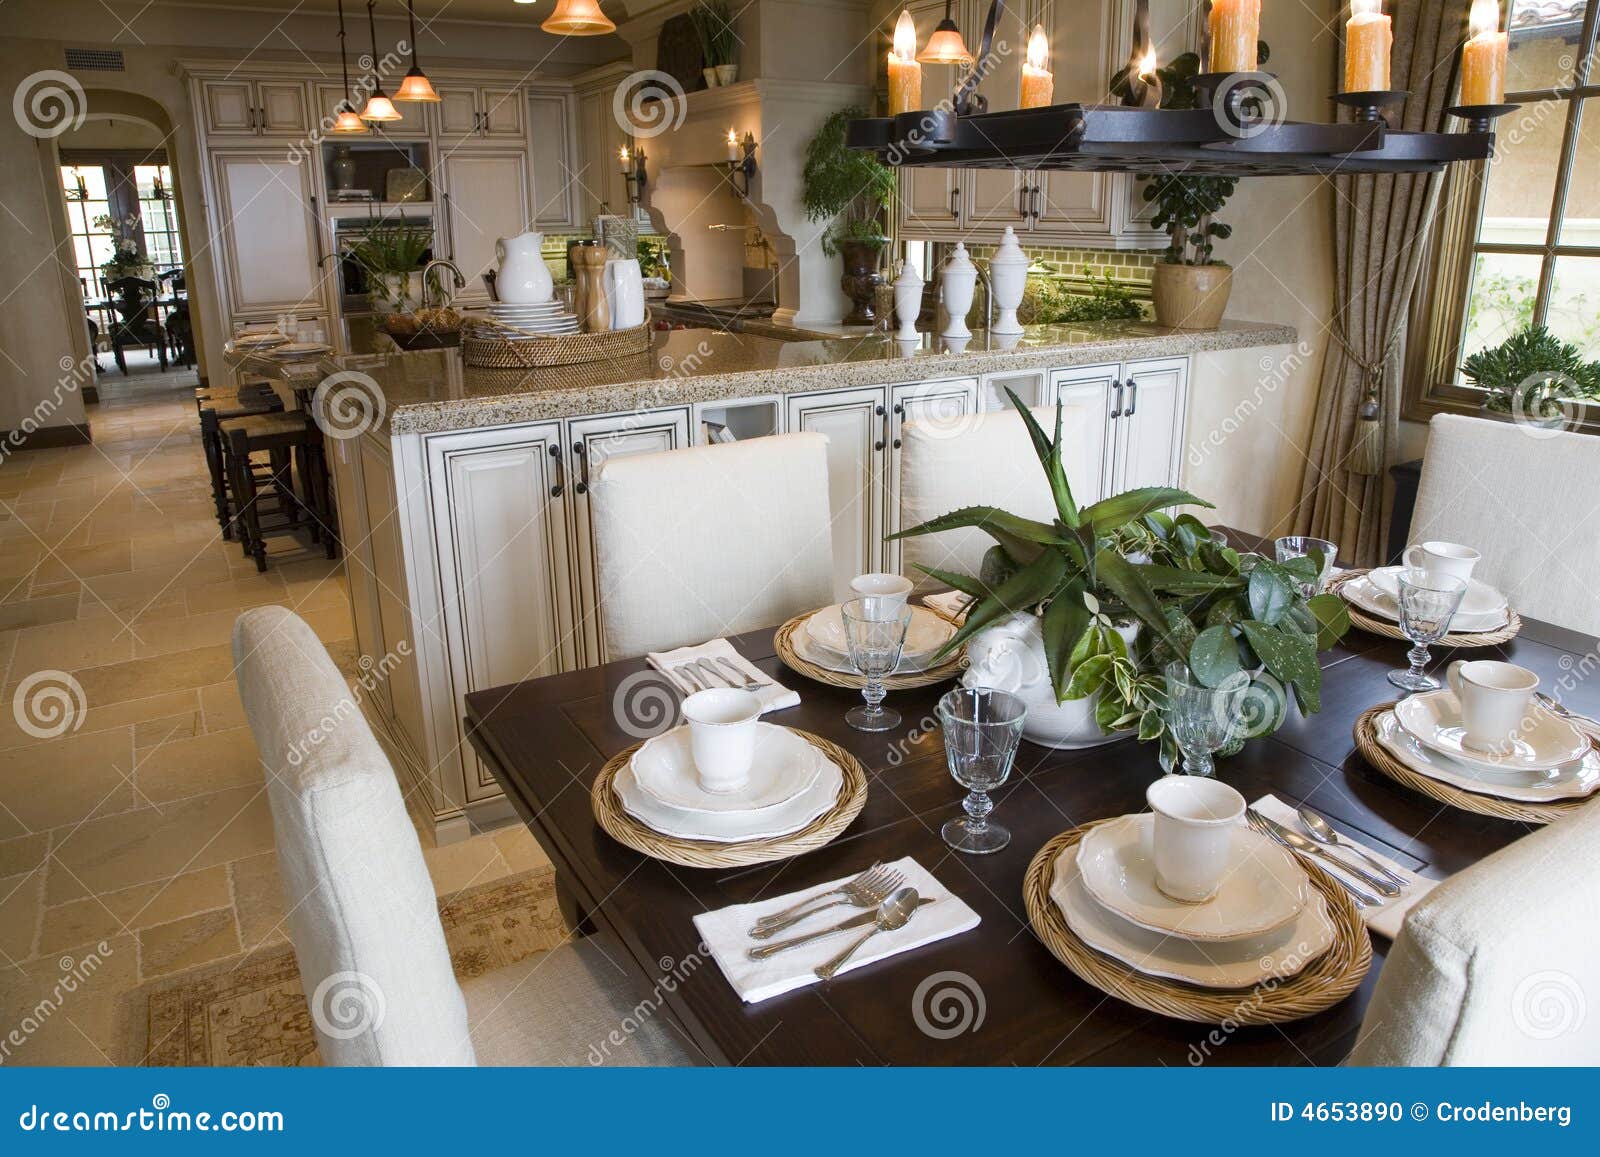 Luxury Home Breakfast Table. Stock Photo - Image of house, architecture ...